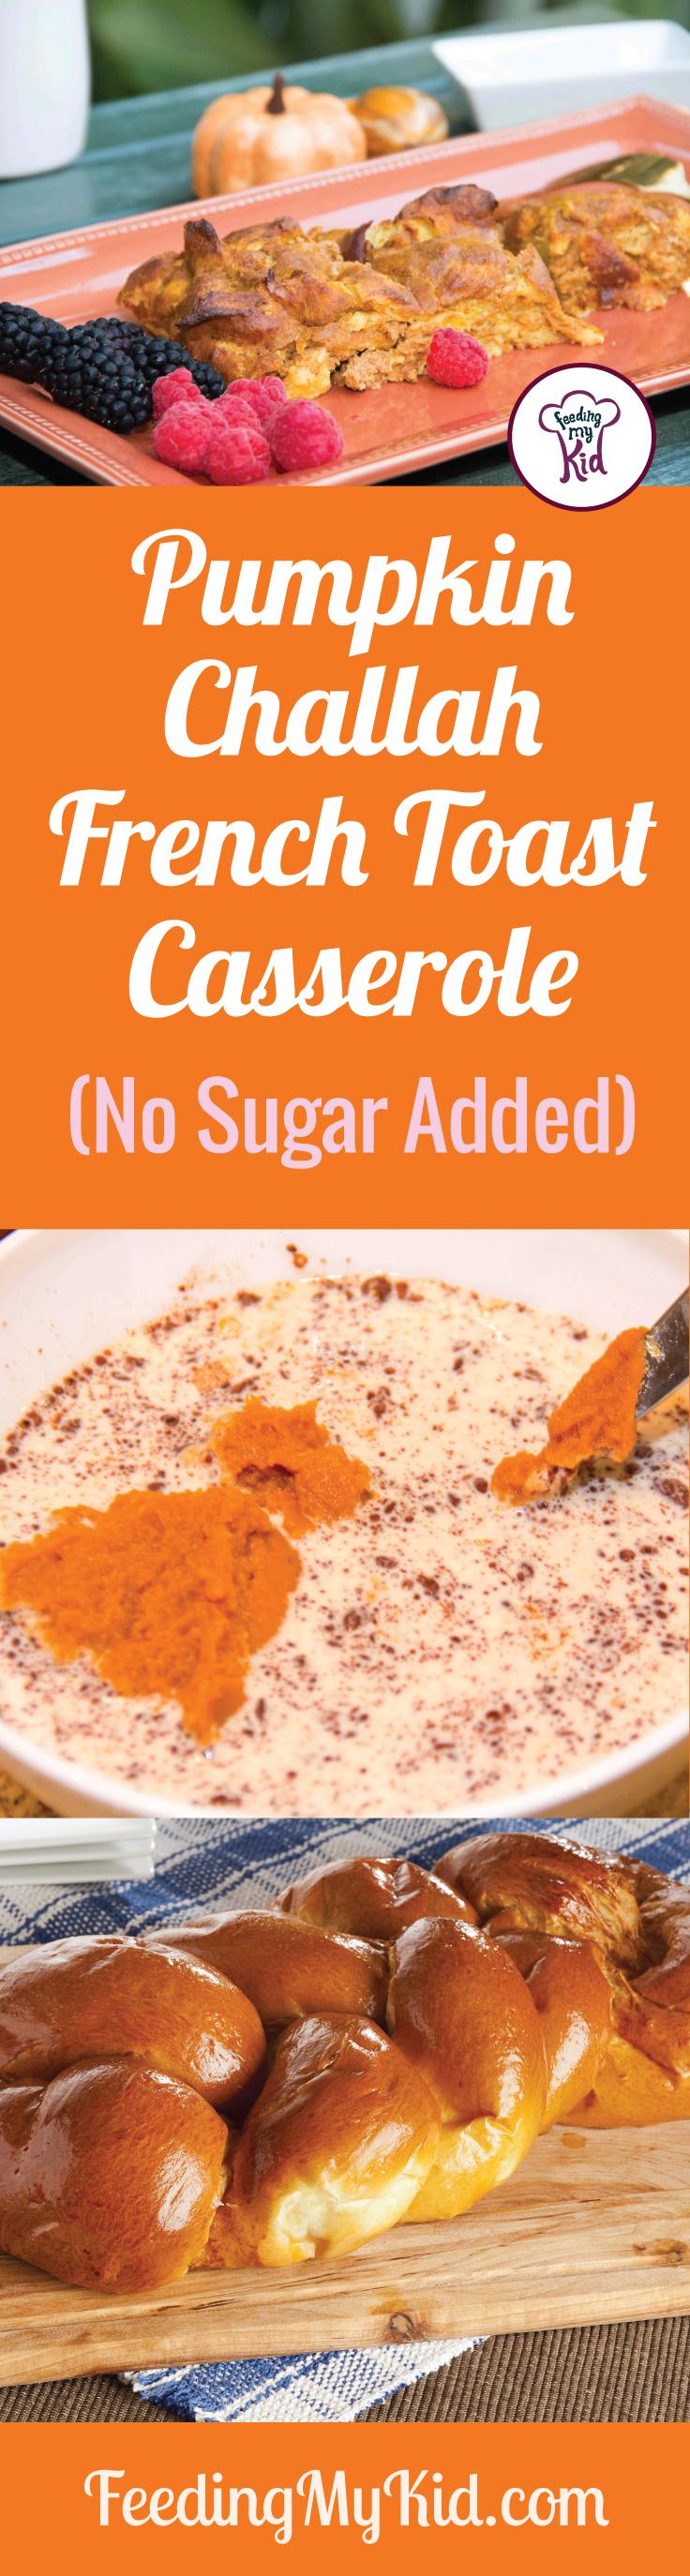 Pumpkin Callah French Toast Casserole Recipe (loaded with fiber and no sugar added) You'll love it!